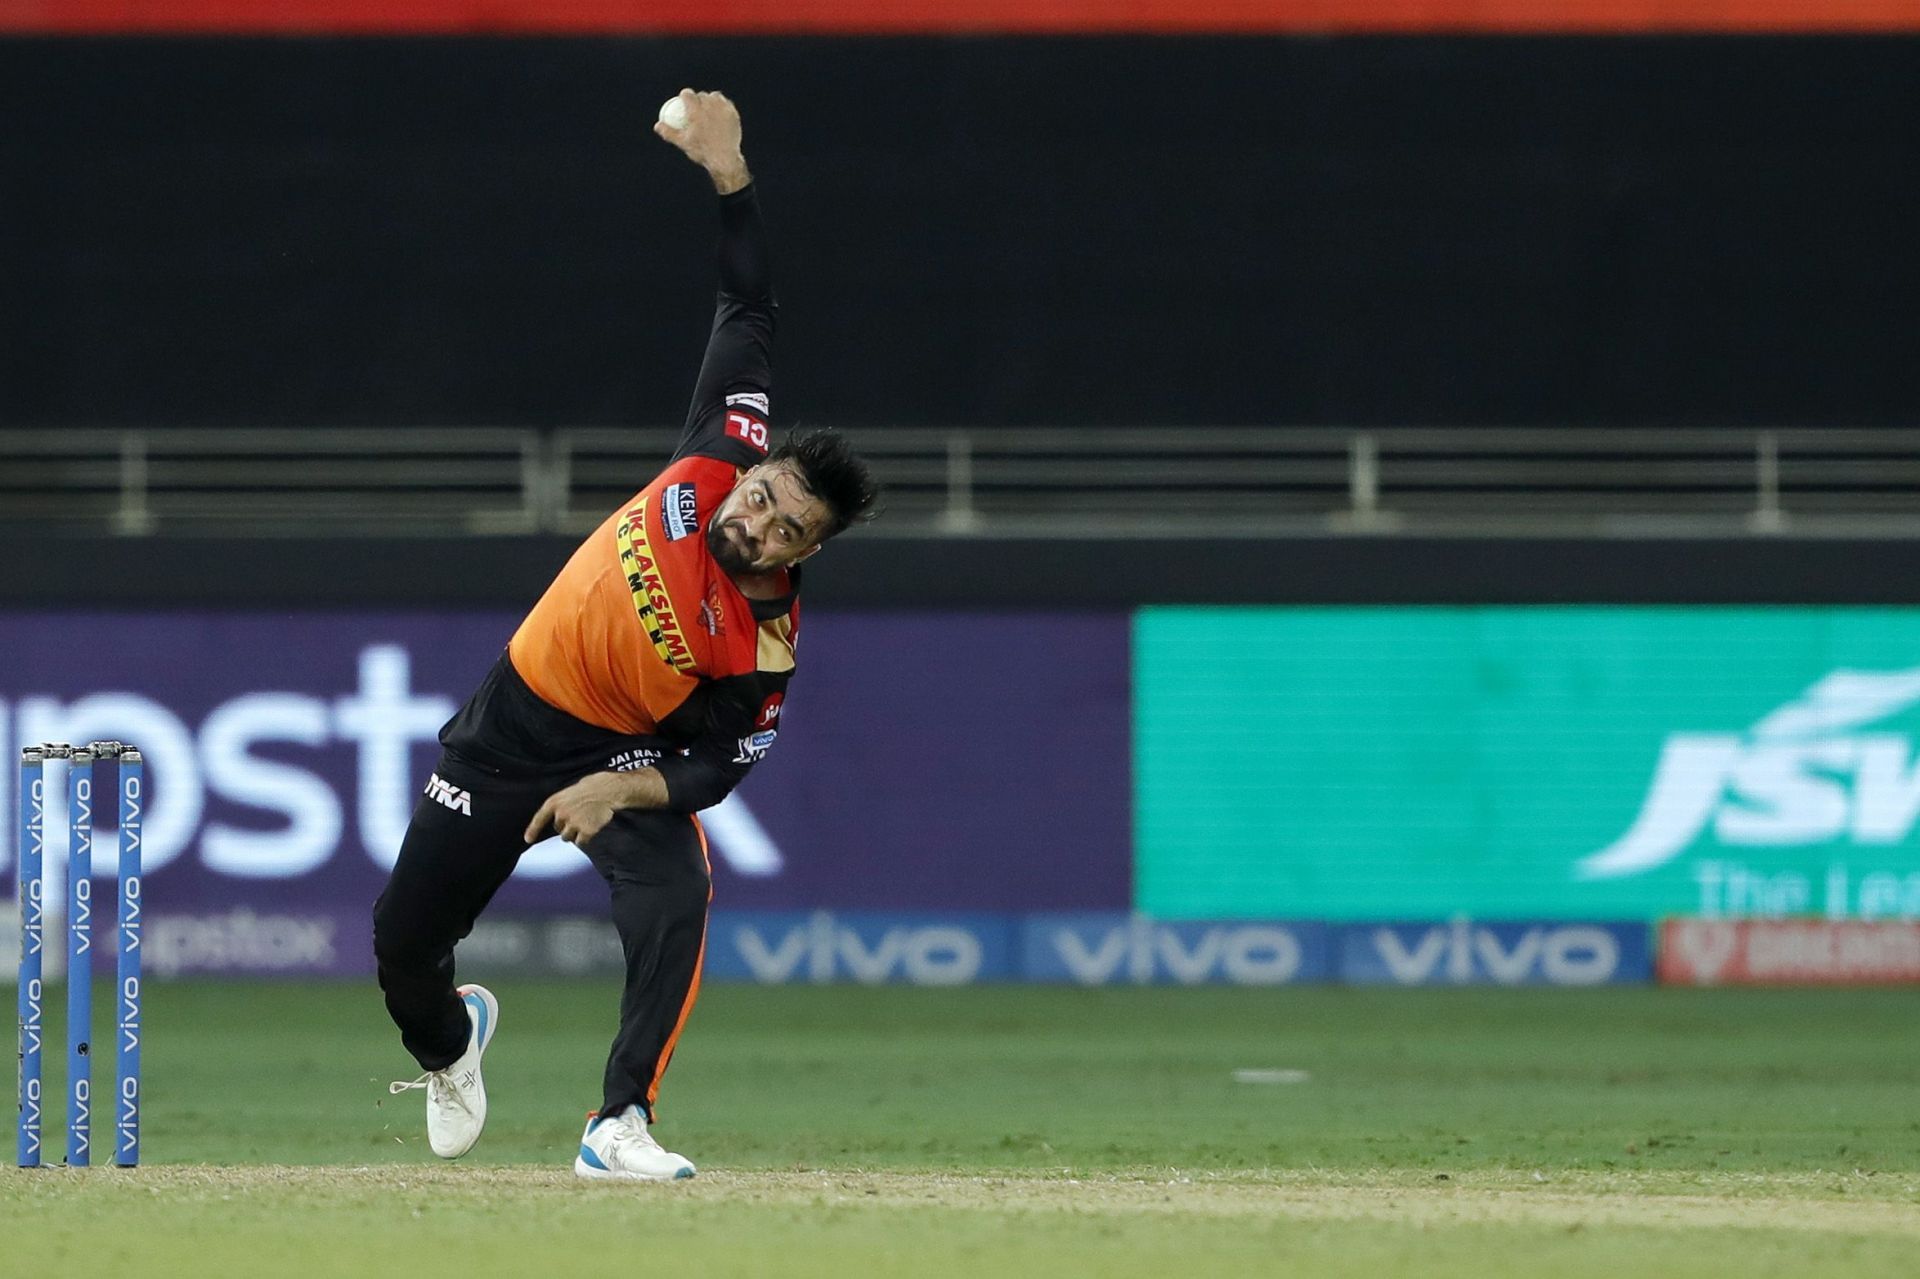 Rashid Khan to turn out in new colors come IPL 2022? (Picture Credits: Saikat Das/Sportzpics/IPL).